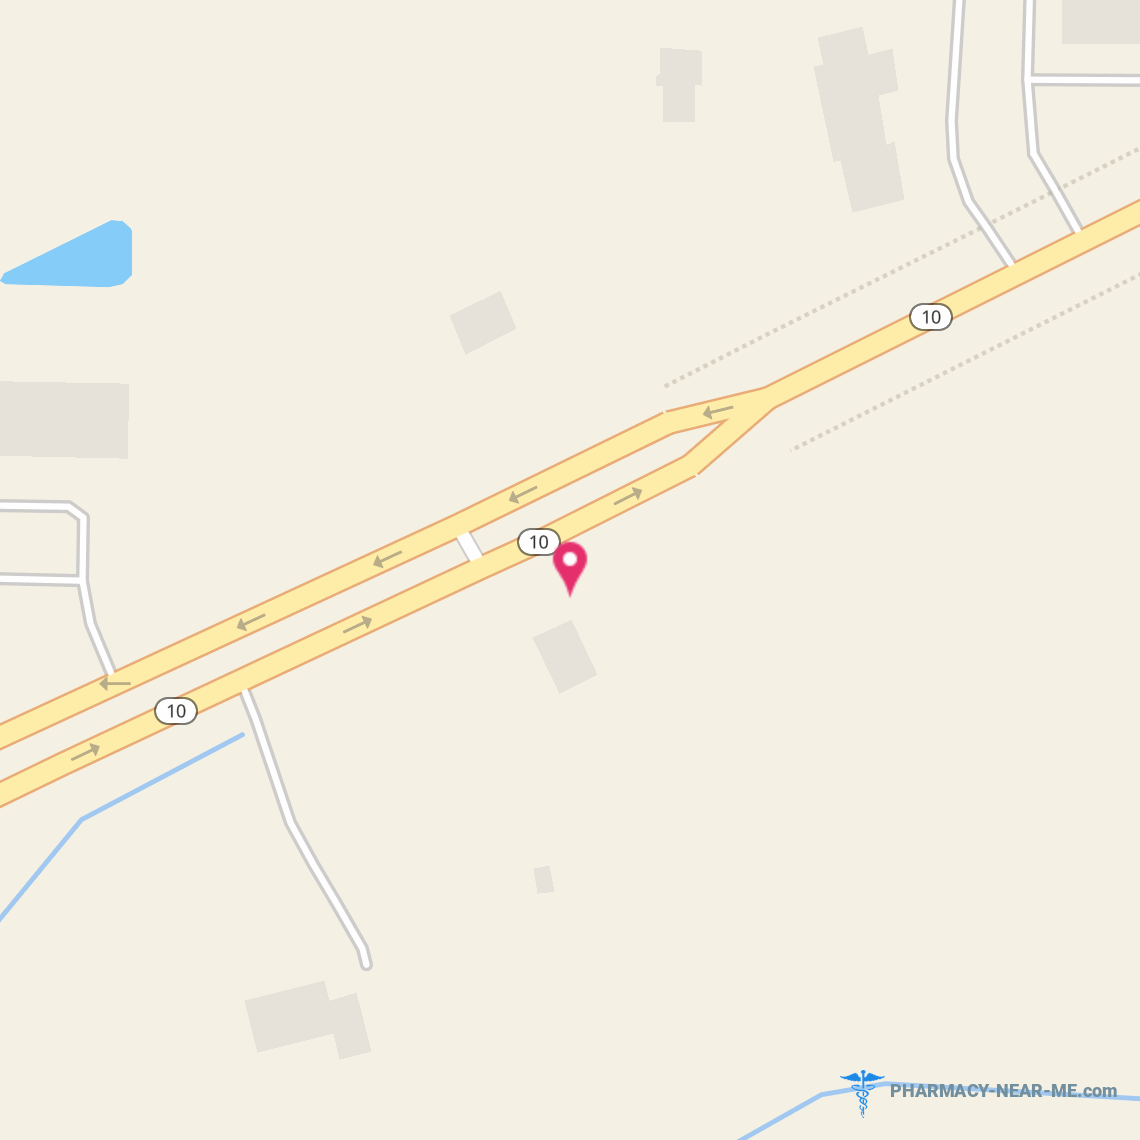 THRIF-T DRUGS - Pharmacy Hours, Phone, Reviews & Information: 3818 Highway 90, Pace, Florida 32571, United States